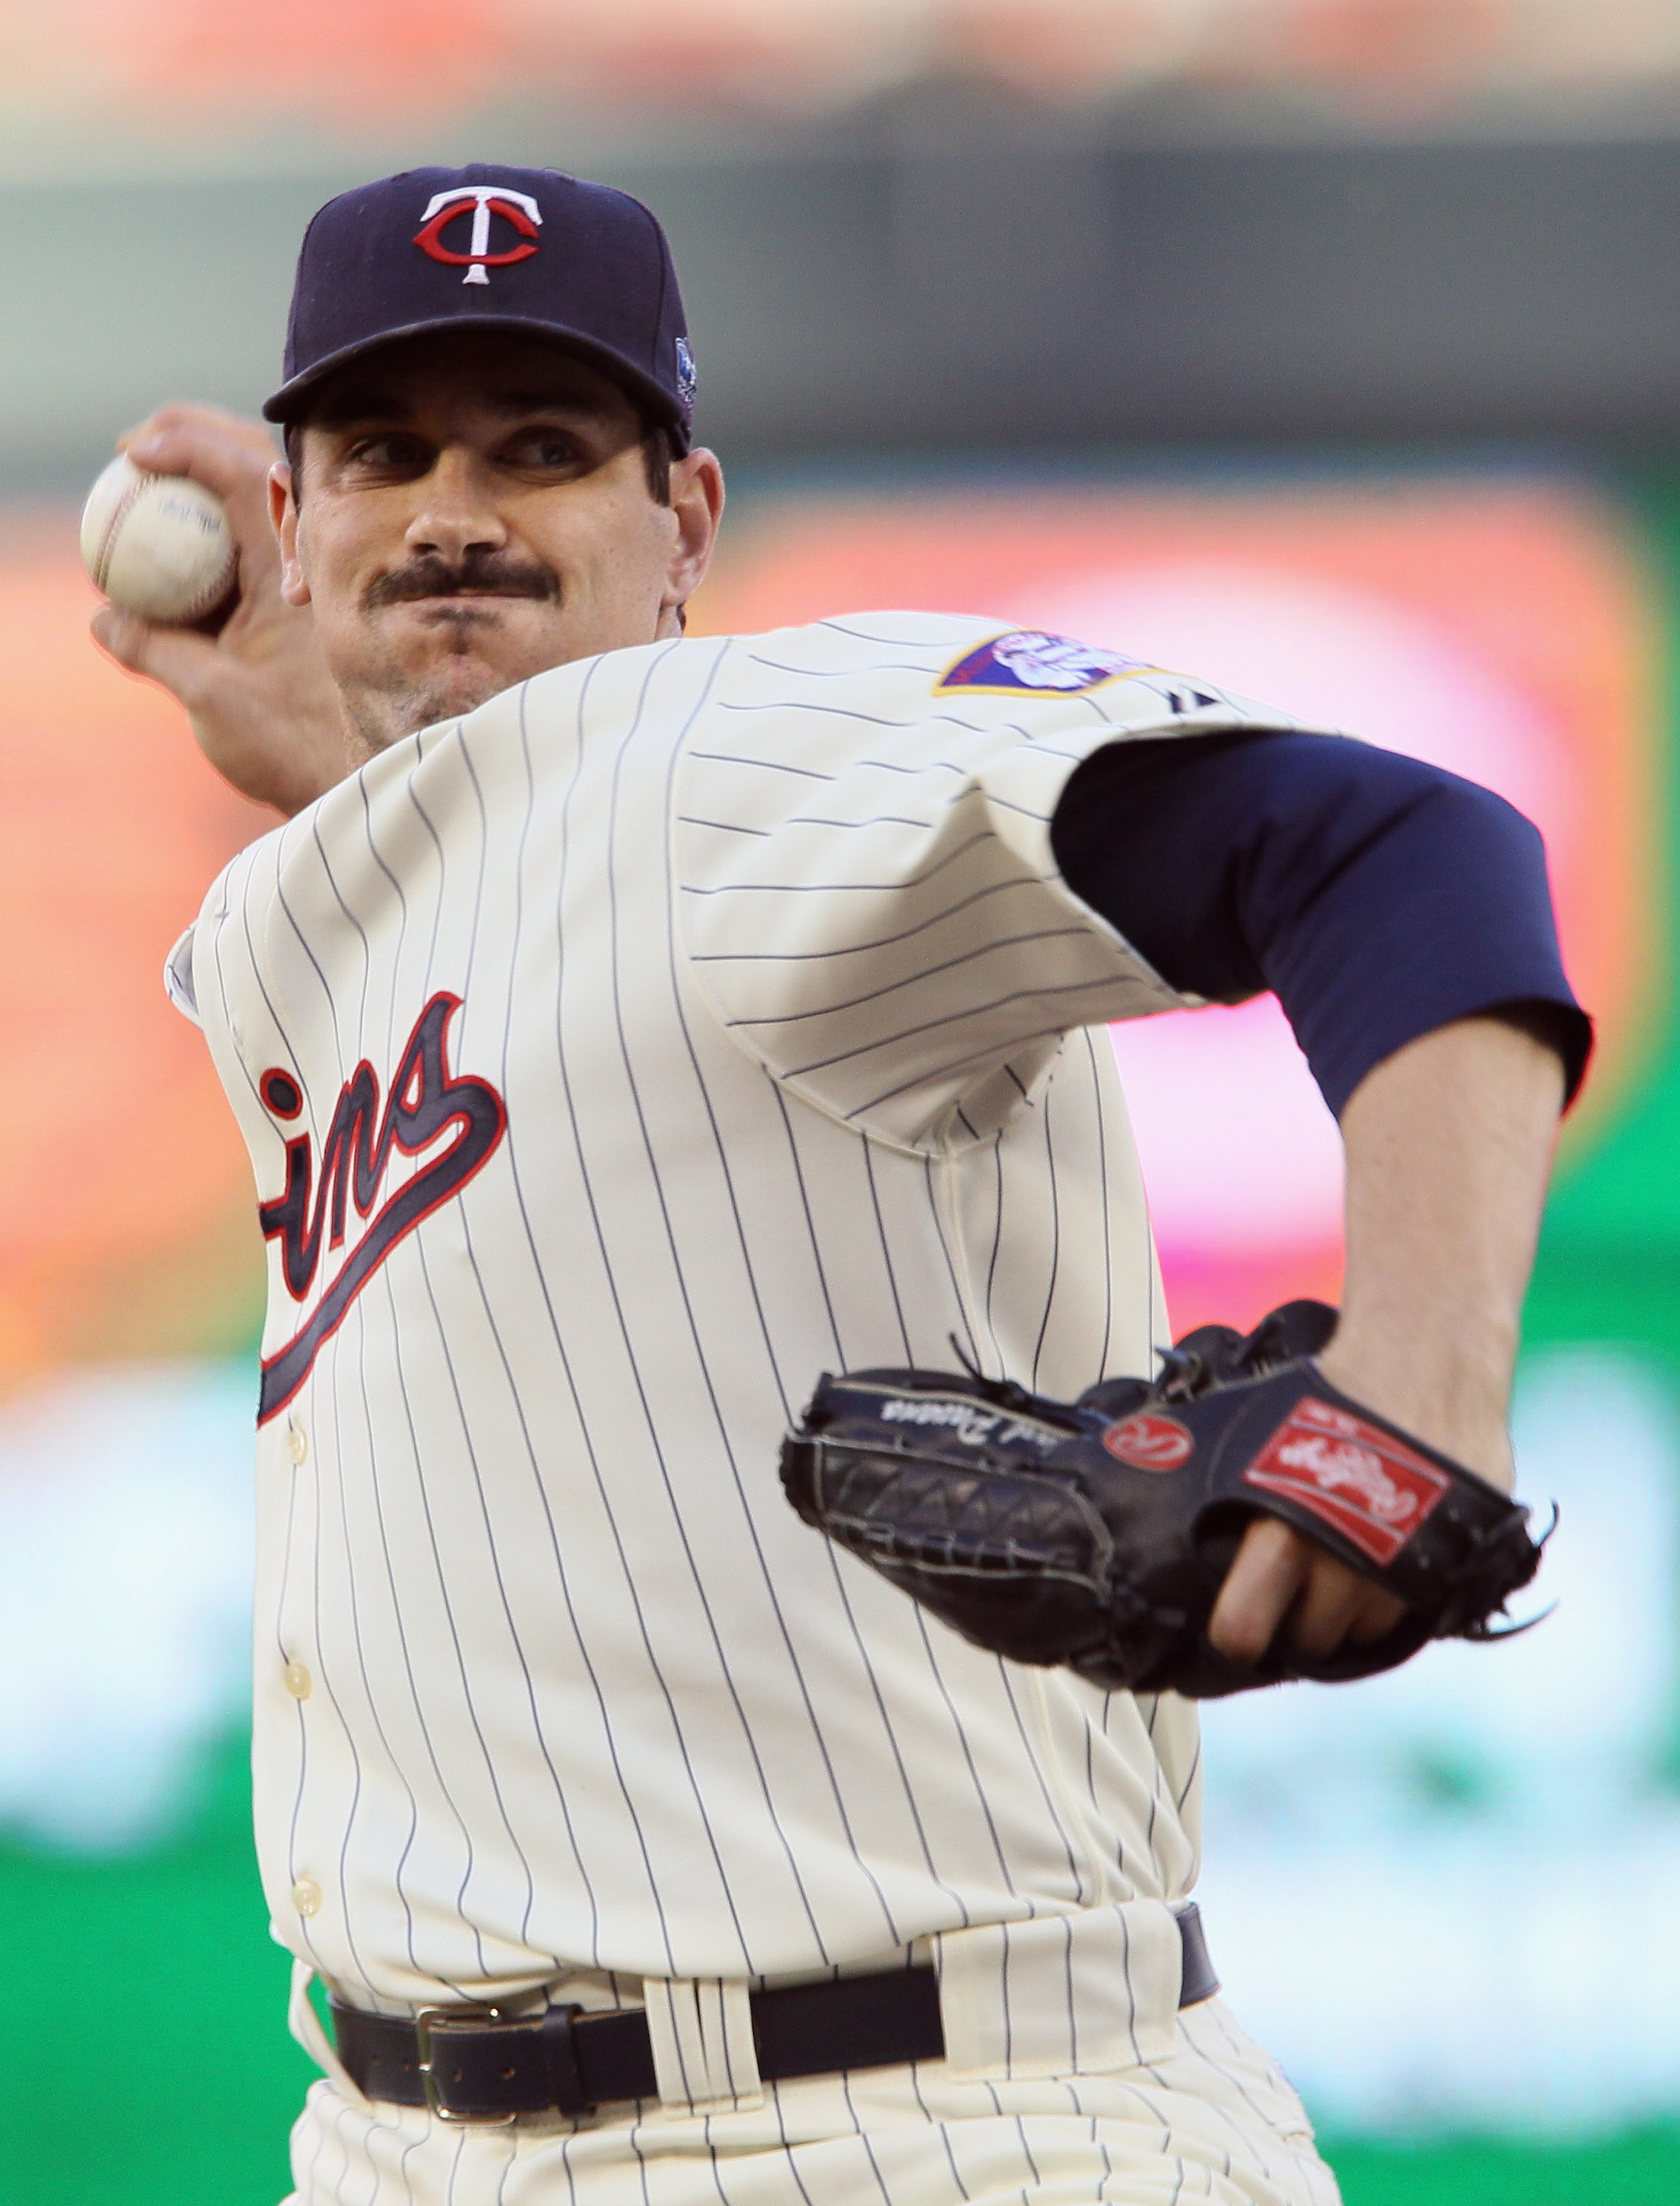 MINNEAPOLIS - OCTOBER 07:  Carl Pavano #48 of the Minnesota Twins delivers a pitch in the first inning against the New York Yankees during game two of the ALDS on October 7, 2010 at Target Field in Minneapolis, Minnesota.  (Photo by Elsa/Getty Images)